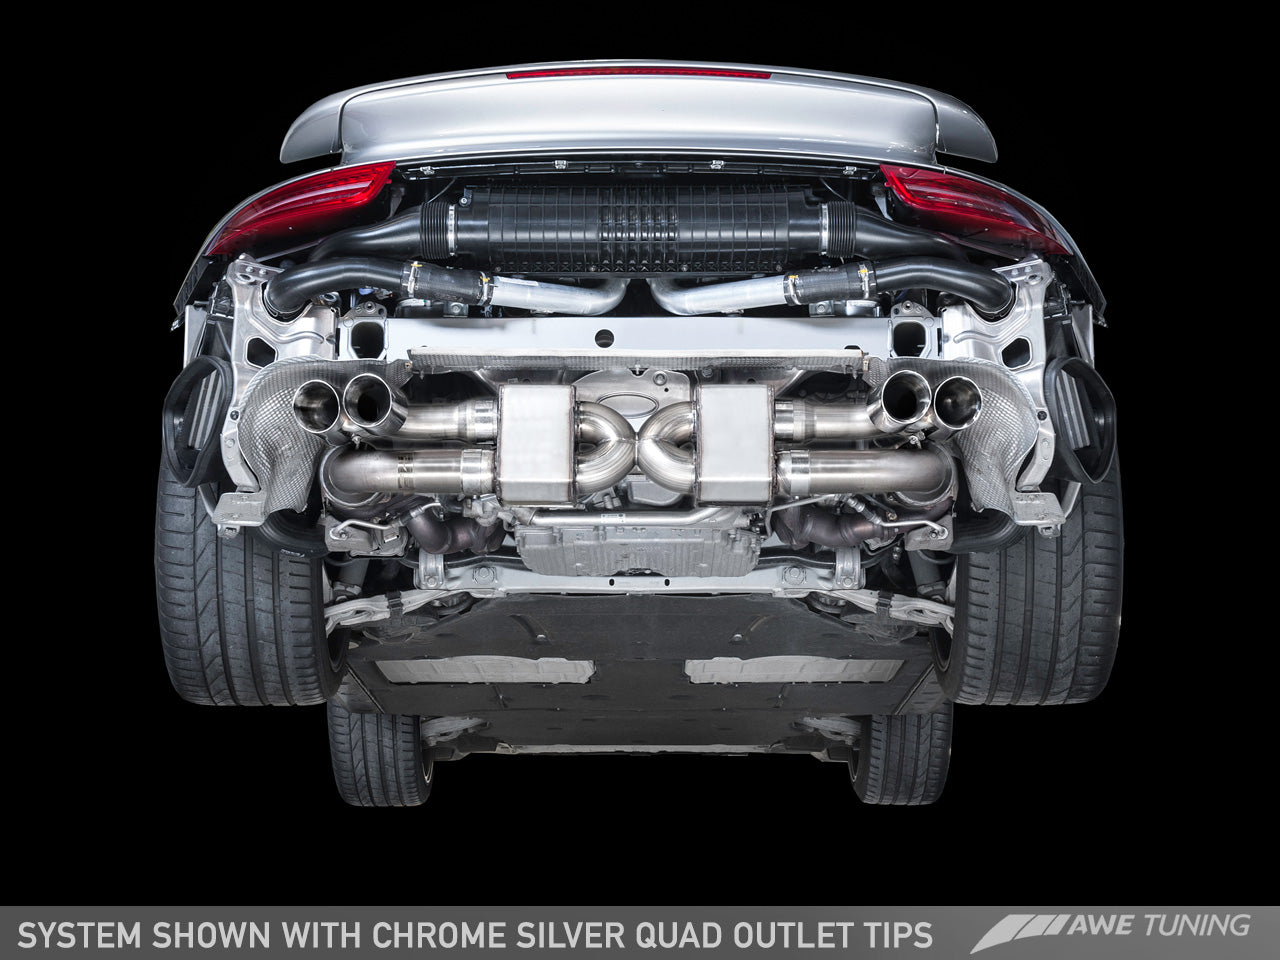 AWE Performance Exhaust System for Porsche 991.1 Turbo and Turbo S